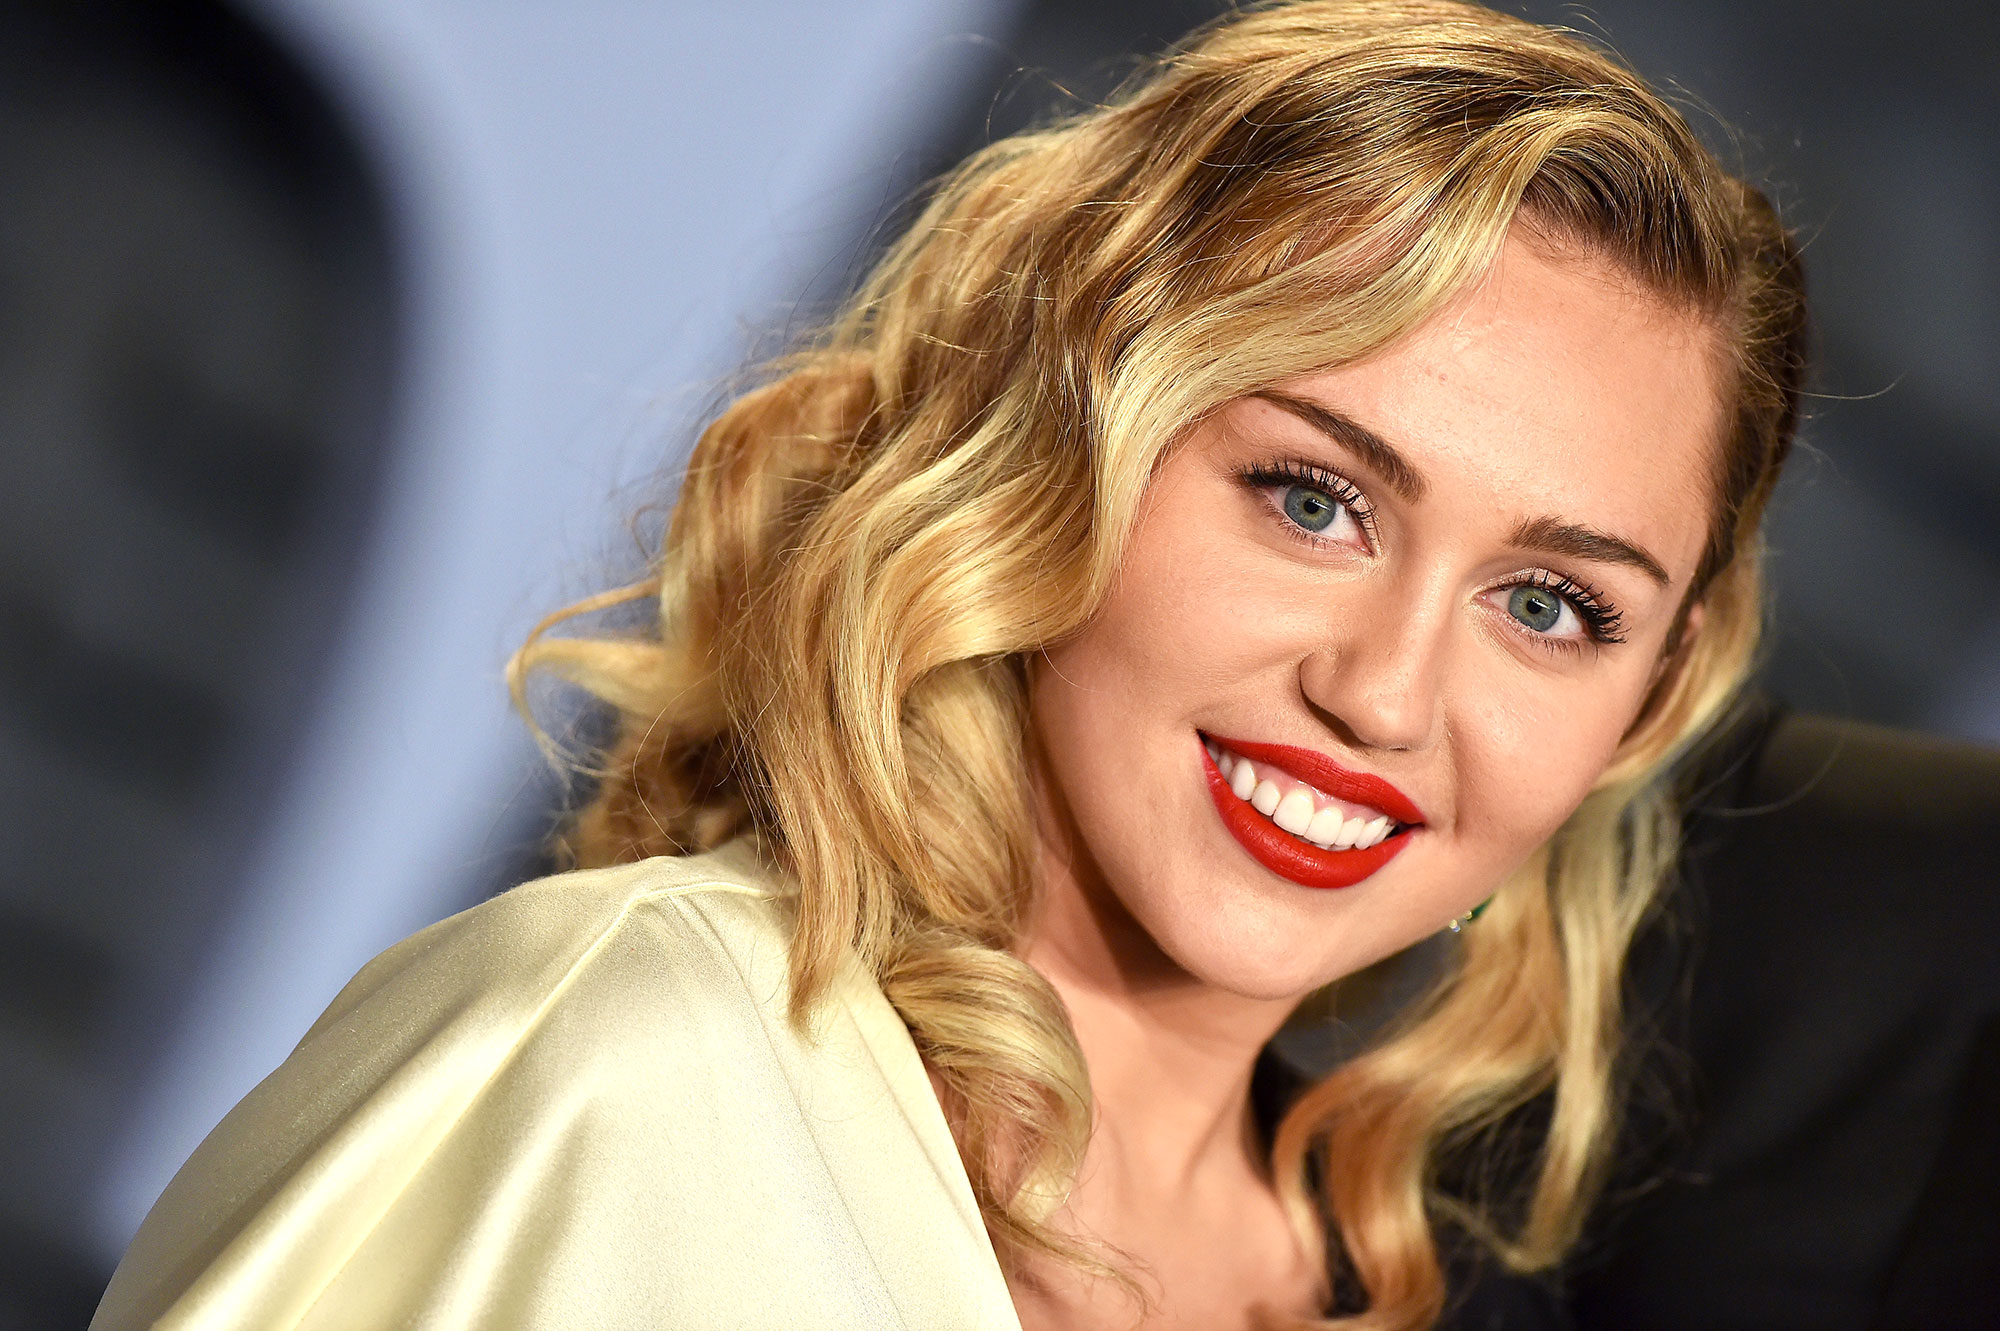 Miley Cyrus Cei Porn - Miley Cyrus' Dating History: Timeline of Her Famous Exes, Flings